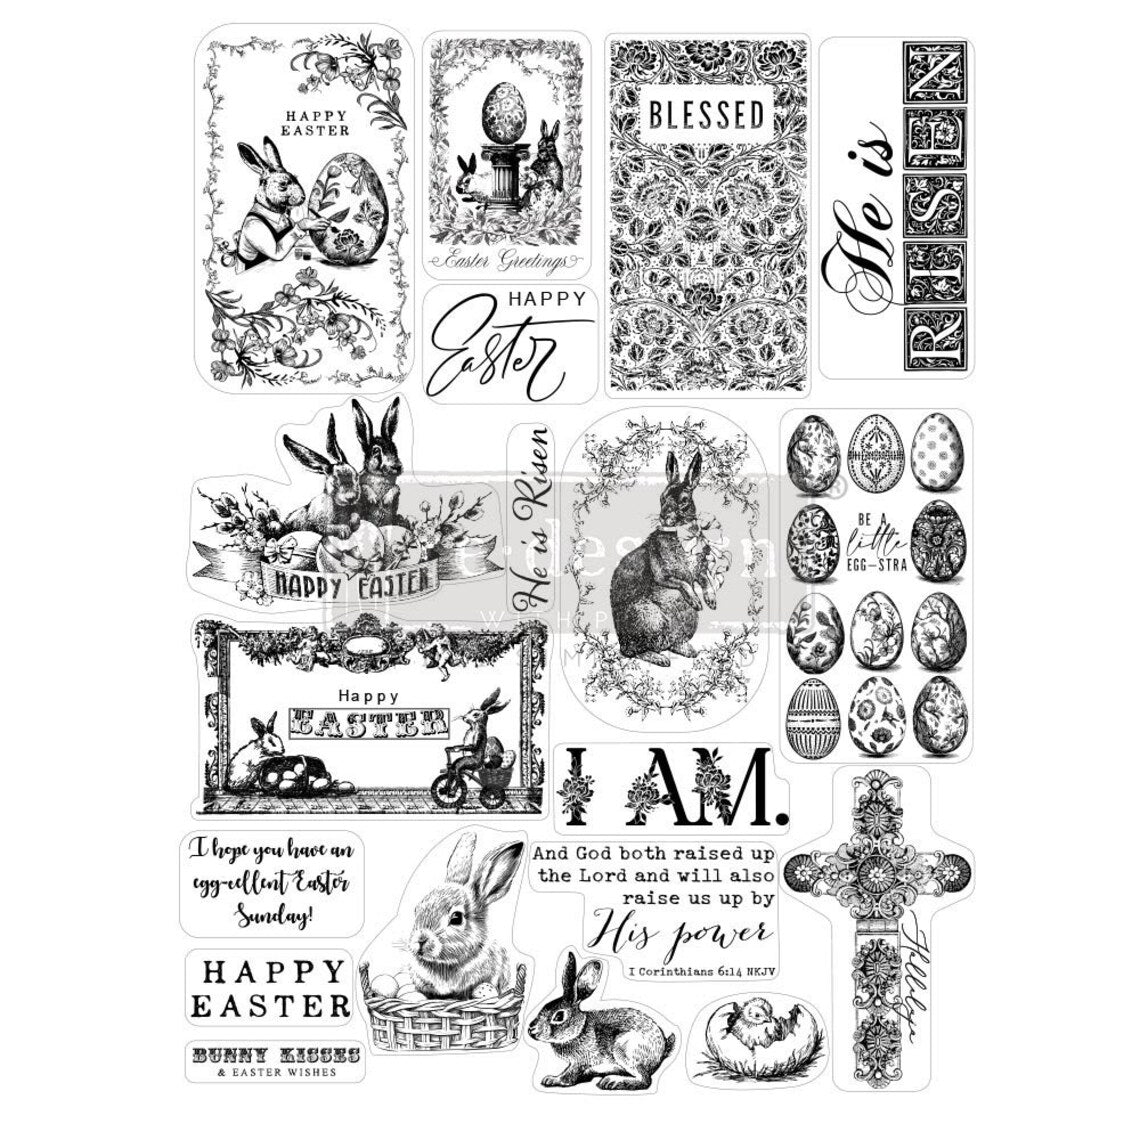 Easter - 8.5x11 sheet size - Redesign Stamp